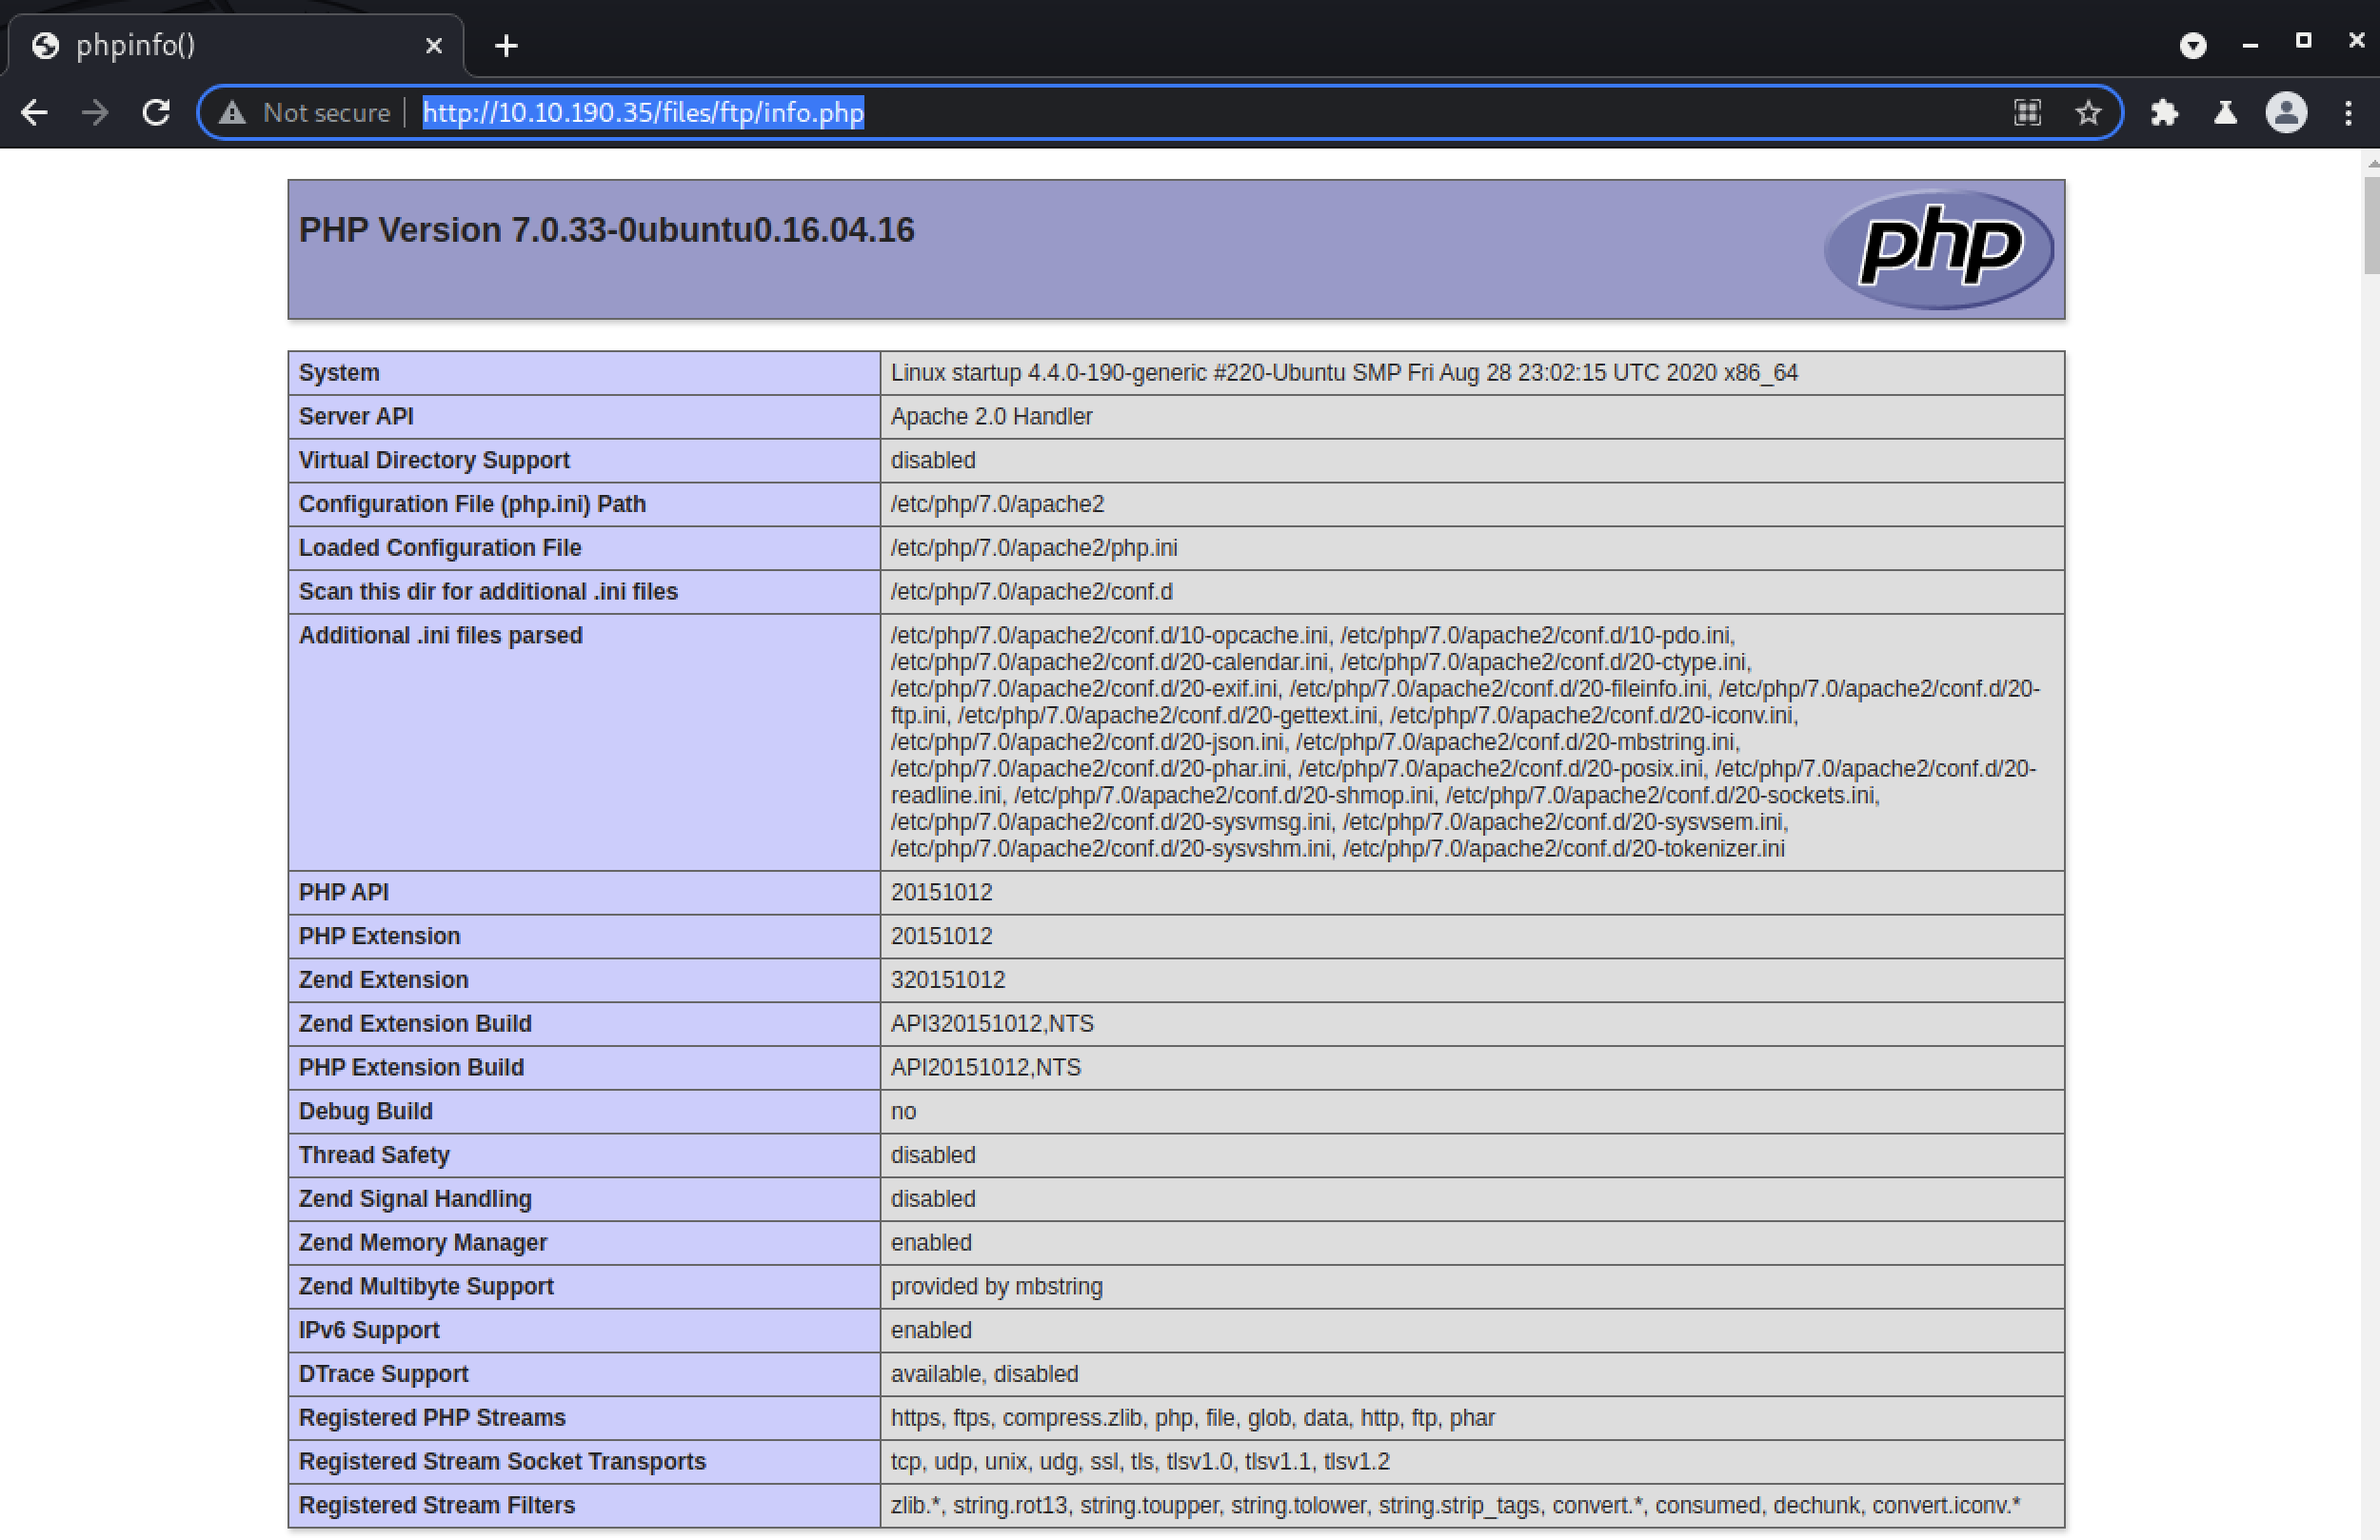 Running phpinfo() on the target